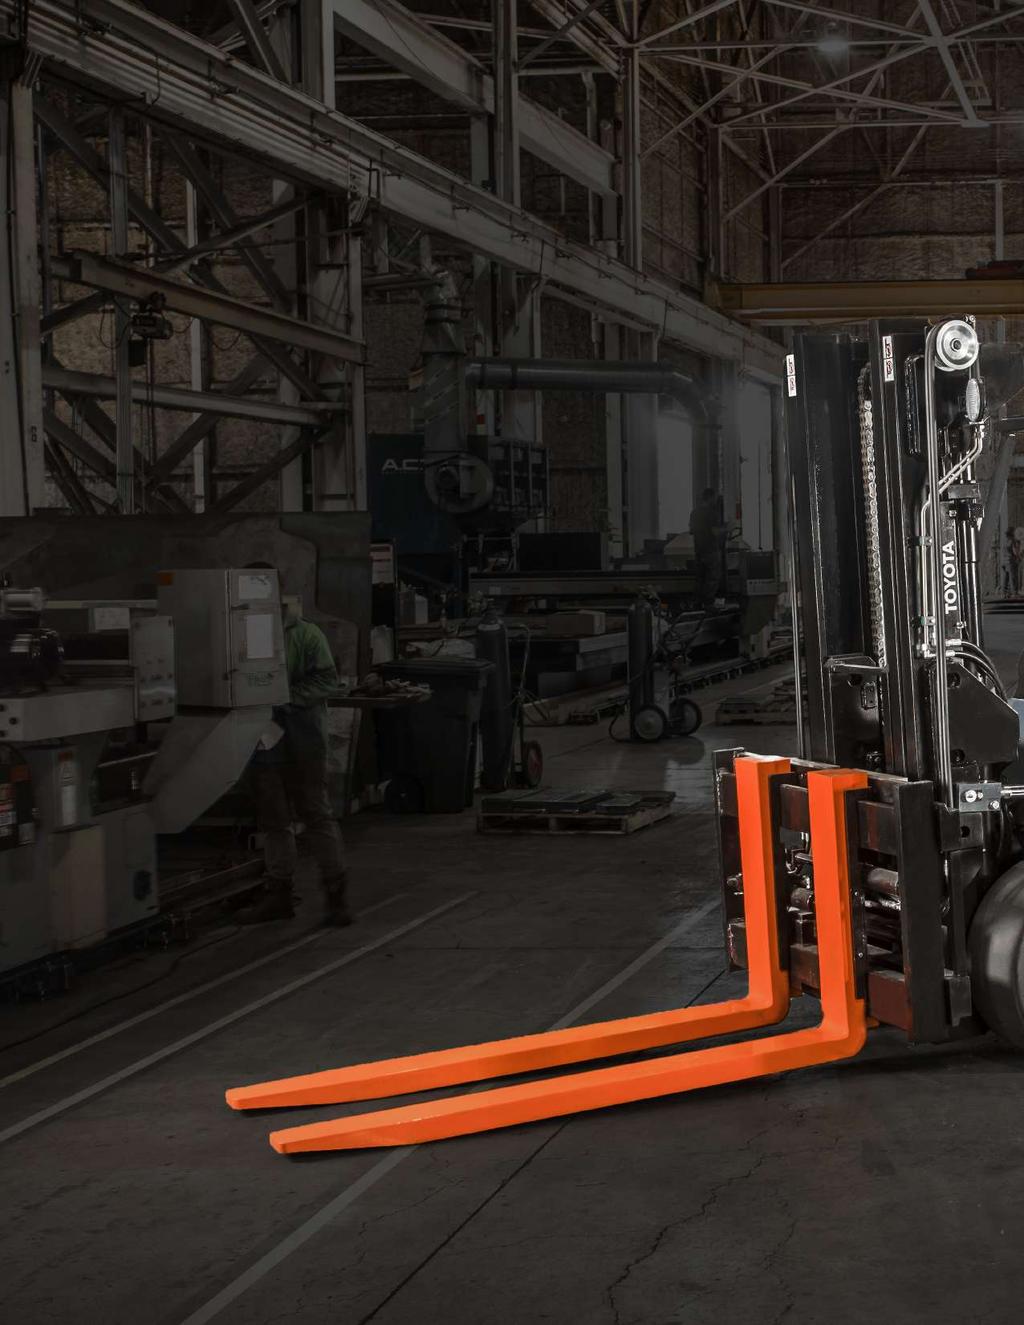 COMPACT POWERHOUSE Prepare to have your expectations blown away. Power, durability, and all the high standards of the Toyota Heavy Duty line of forklifts.